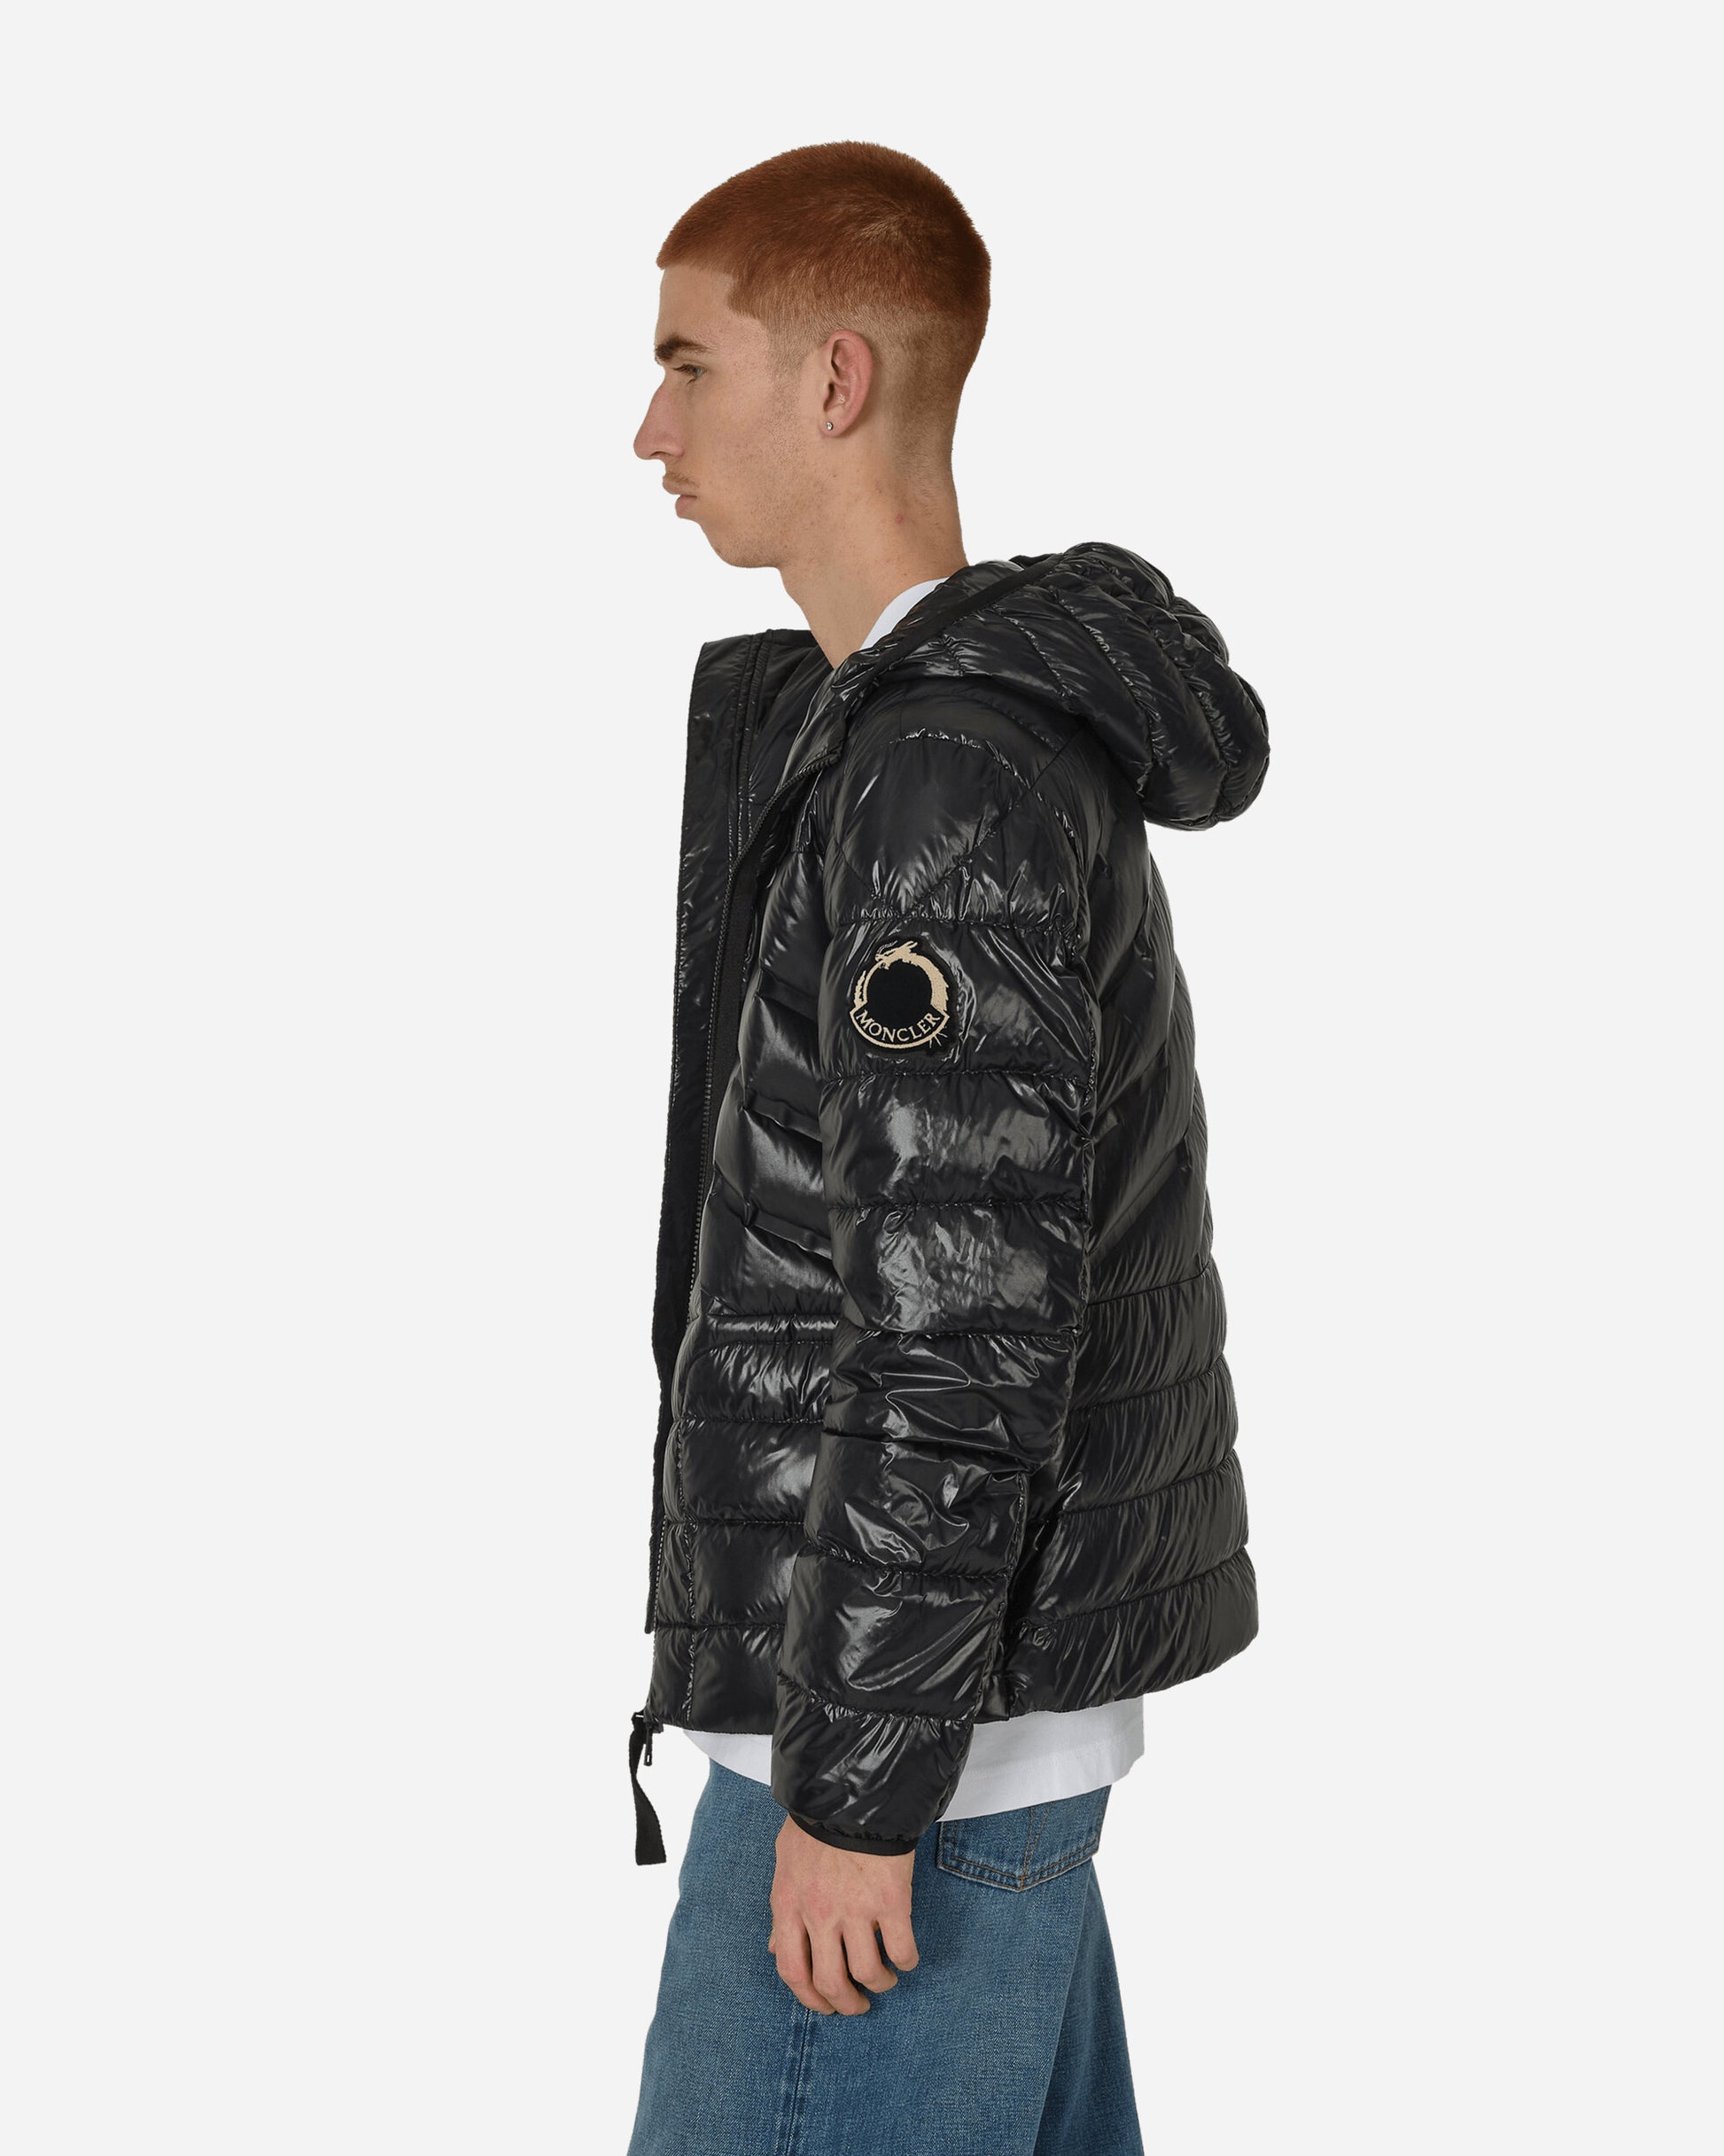 Moncler Chiwen Jacket Chinese New Year Black Coats and Jackets Down Jackets 1A00060595GJ 999